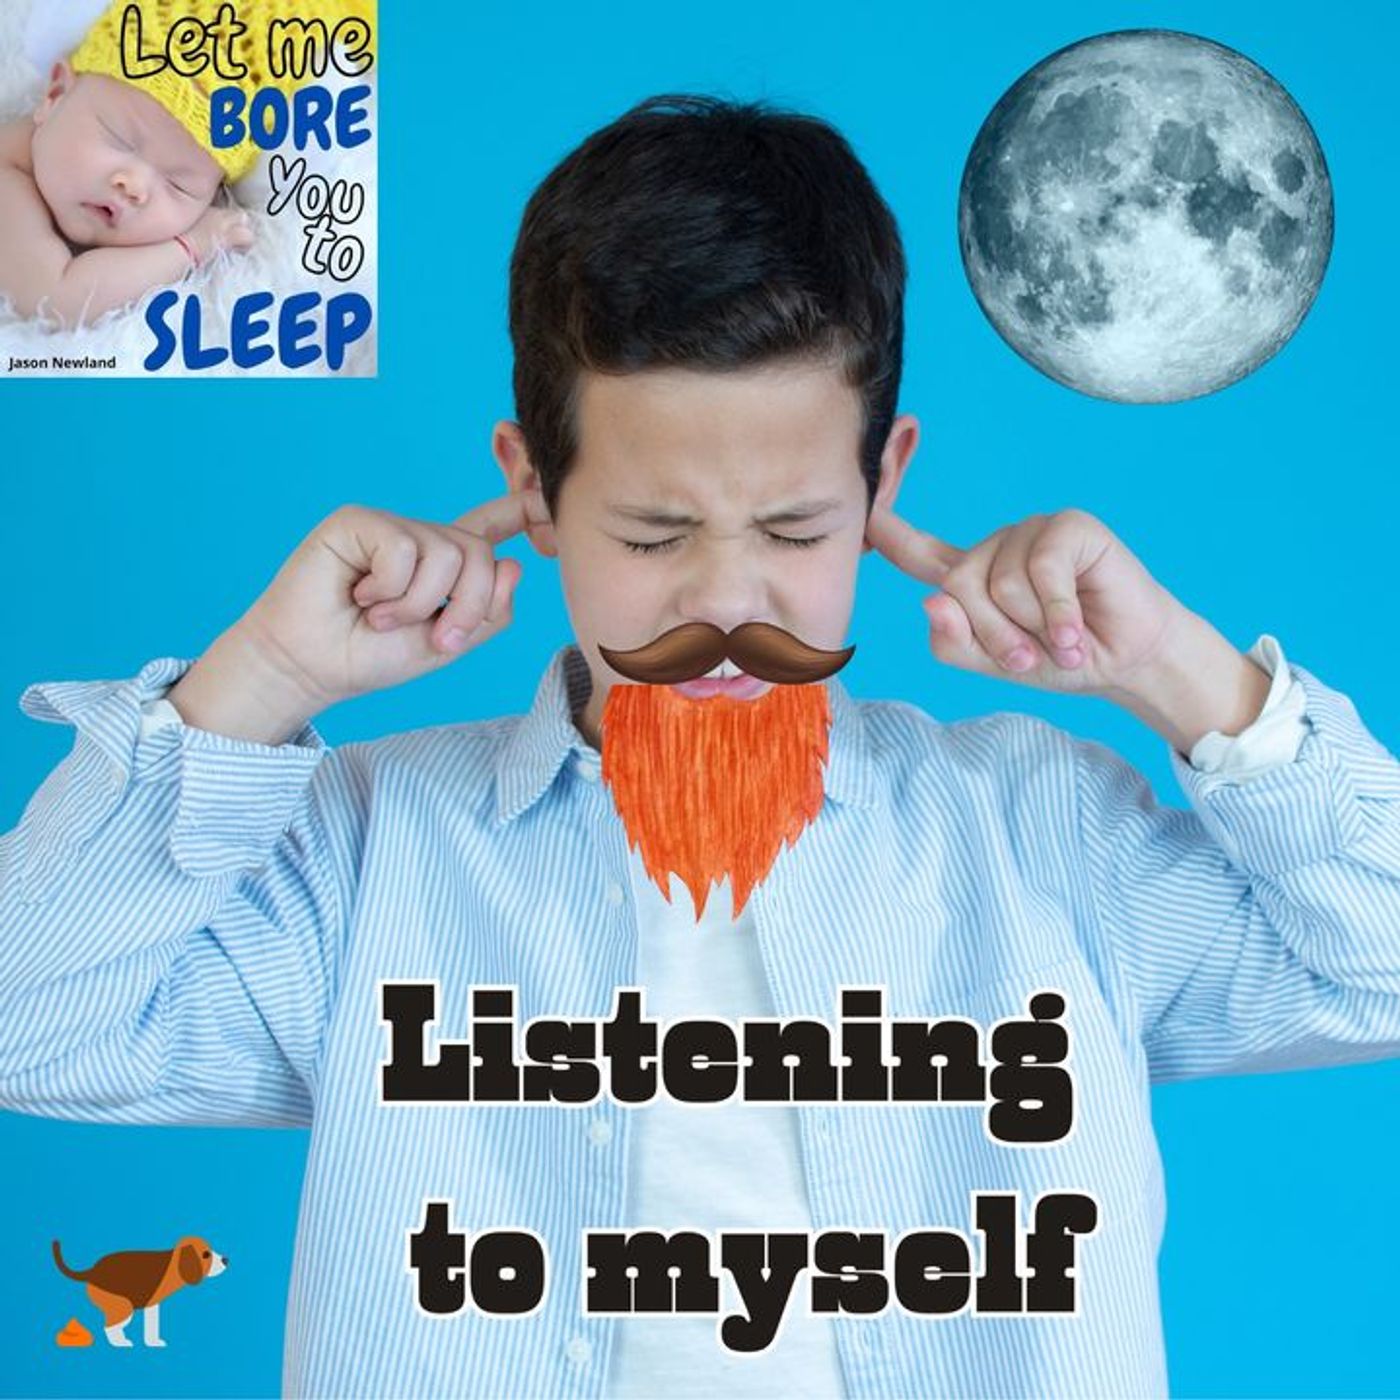 (10 hours) #1040 - I listened to my own recording - Let me bore you to sleep